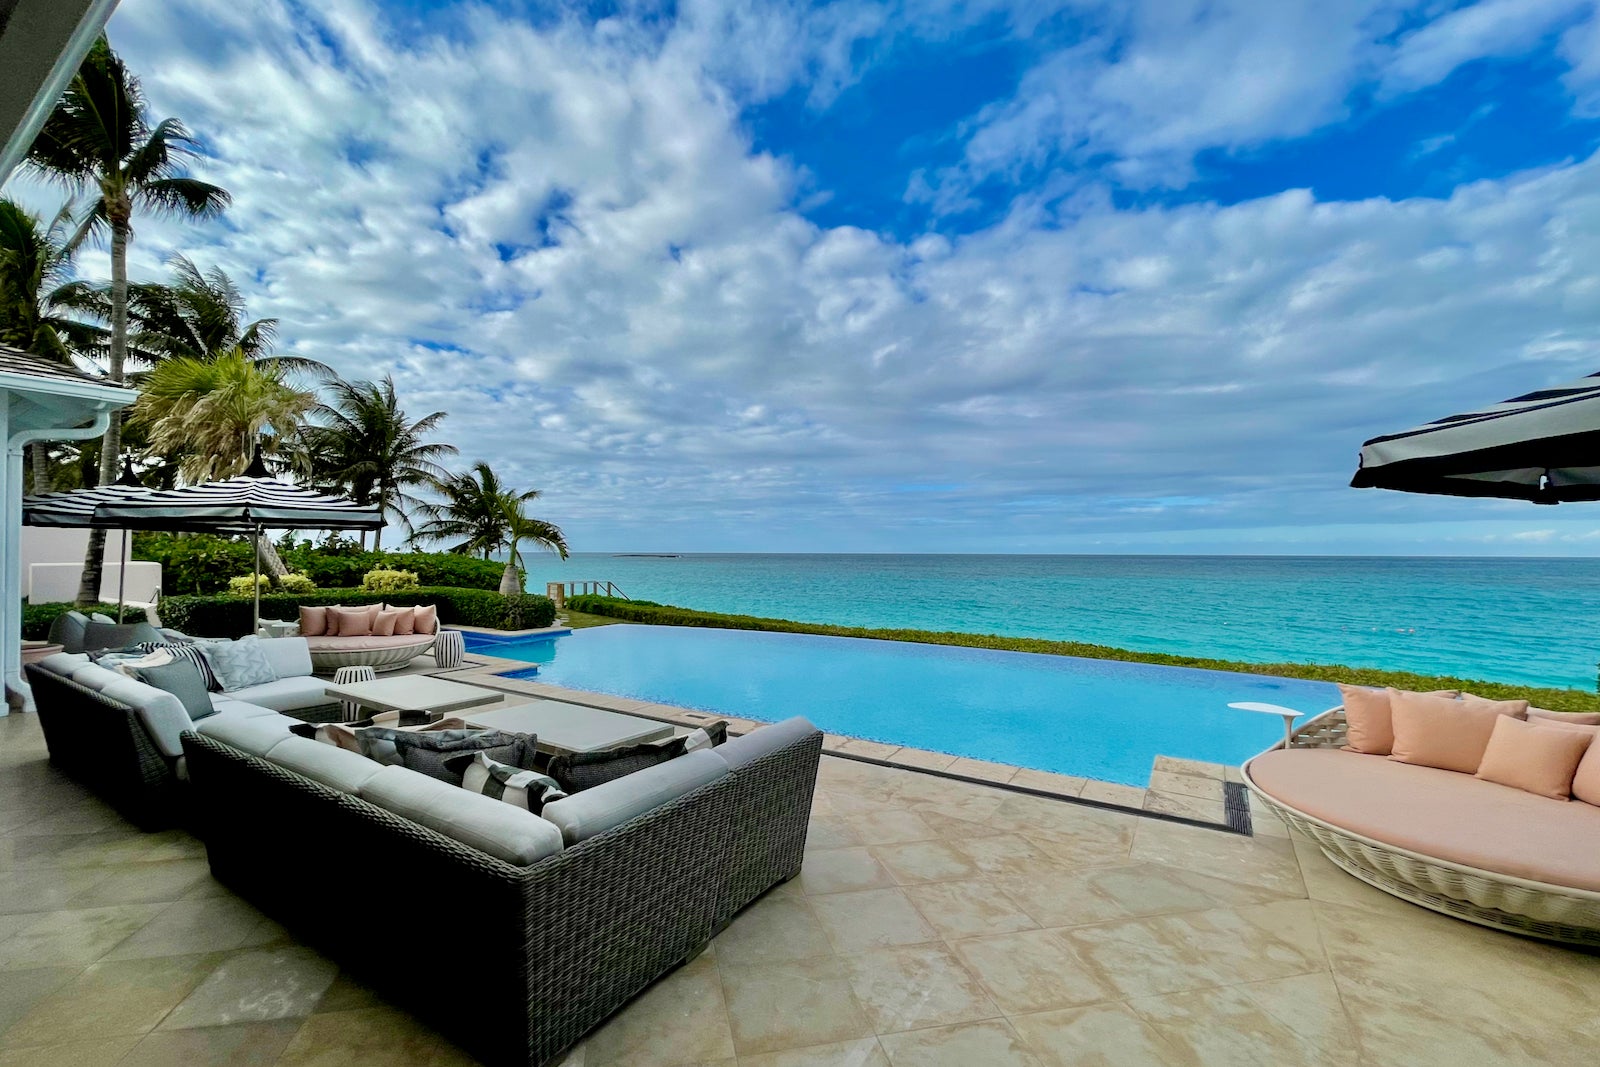 Inside the $17,000-per-night Bahamas villa fit for royalty - The Points Guy